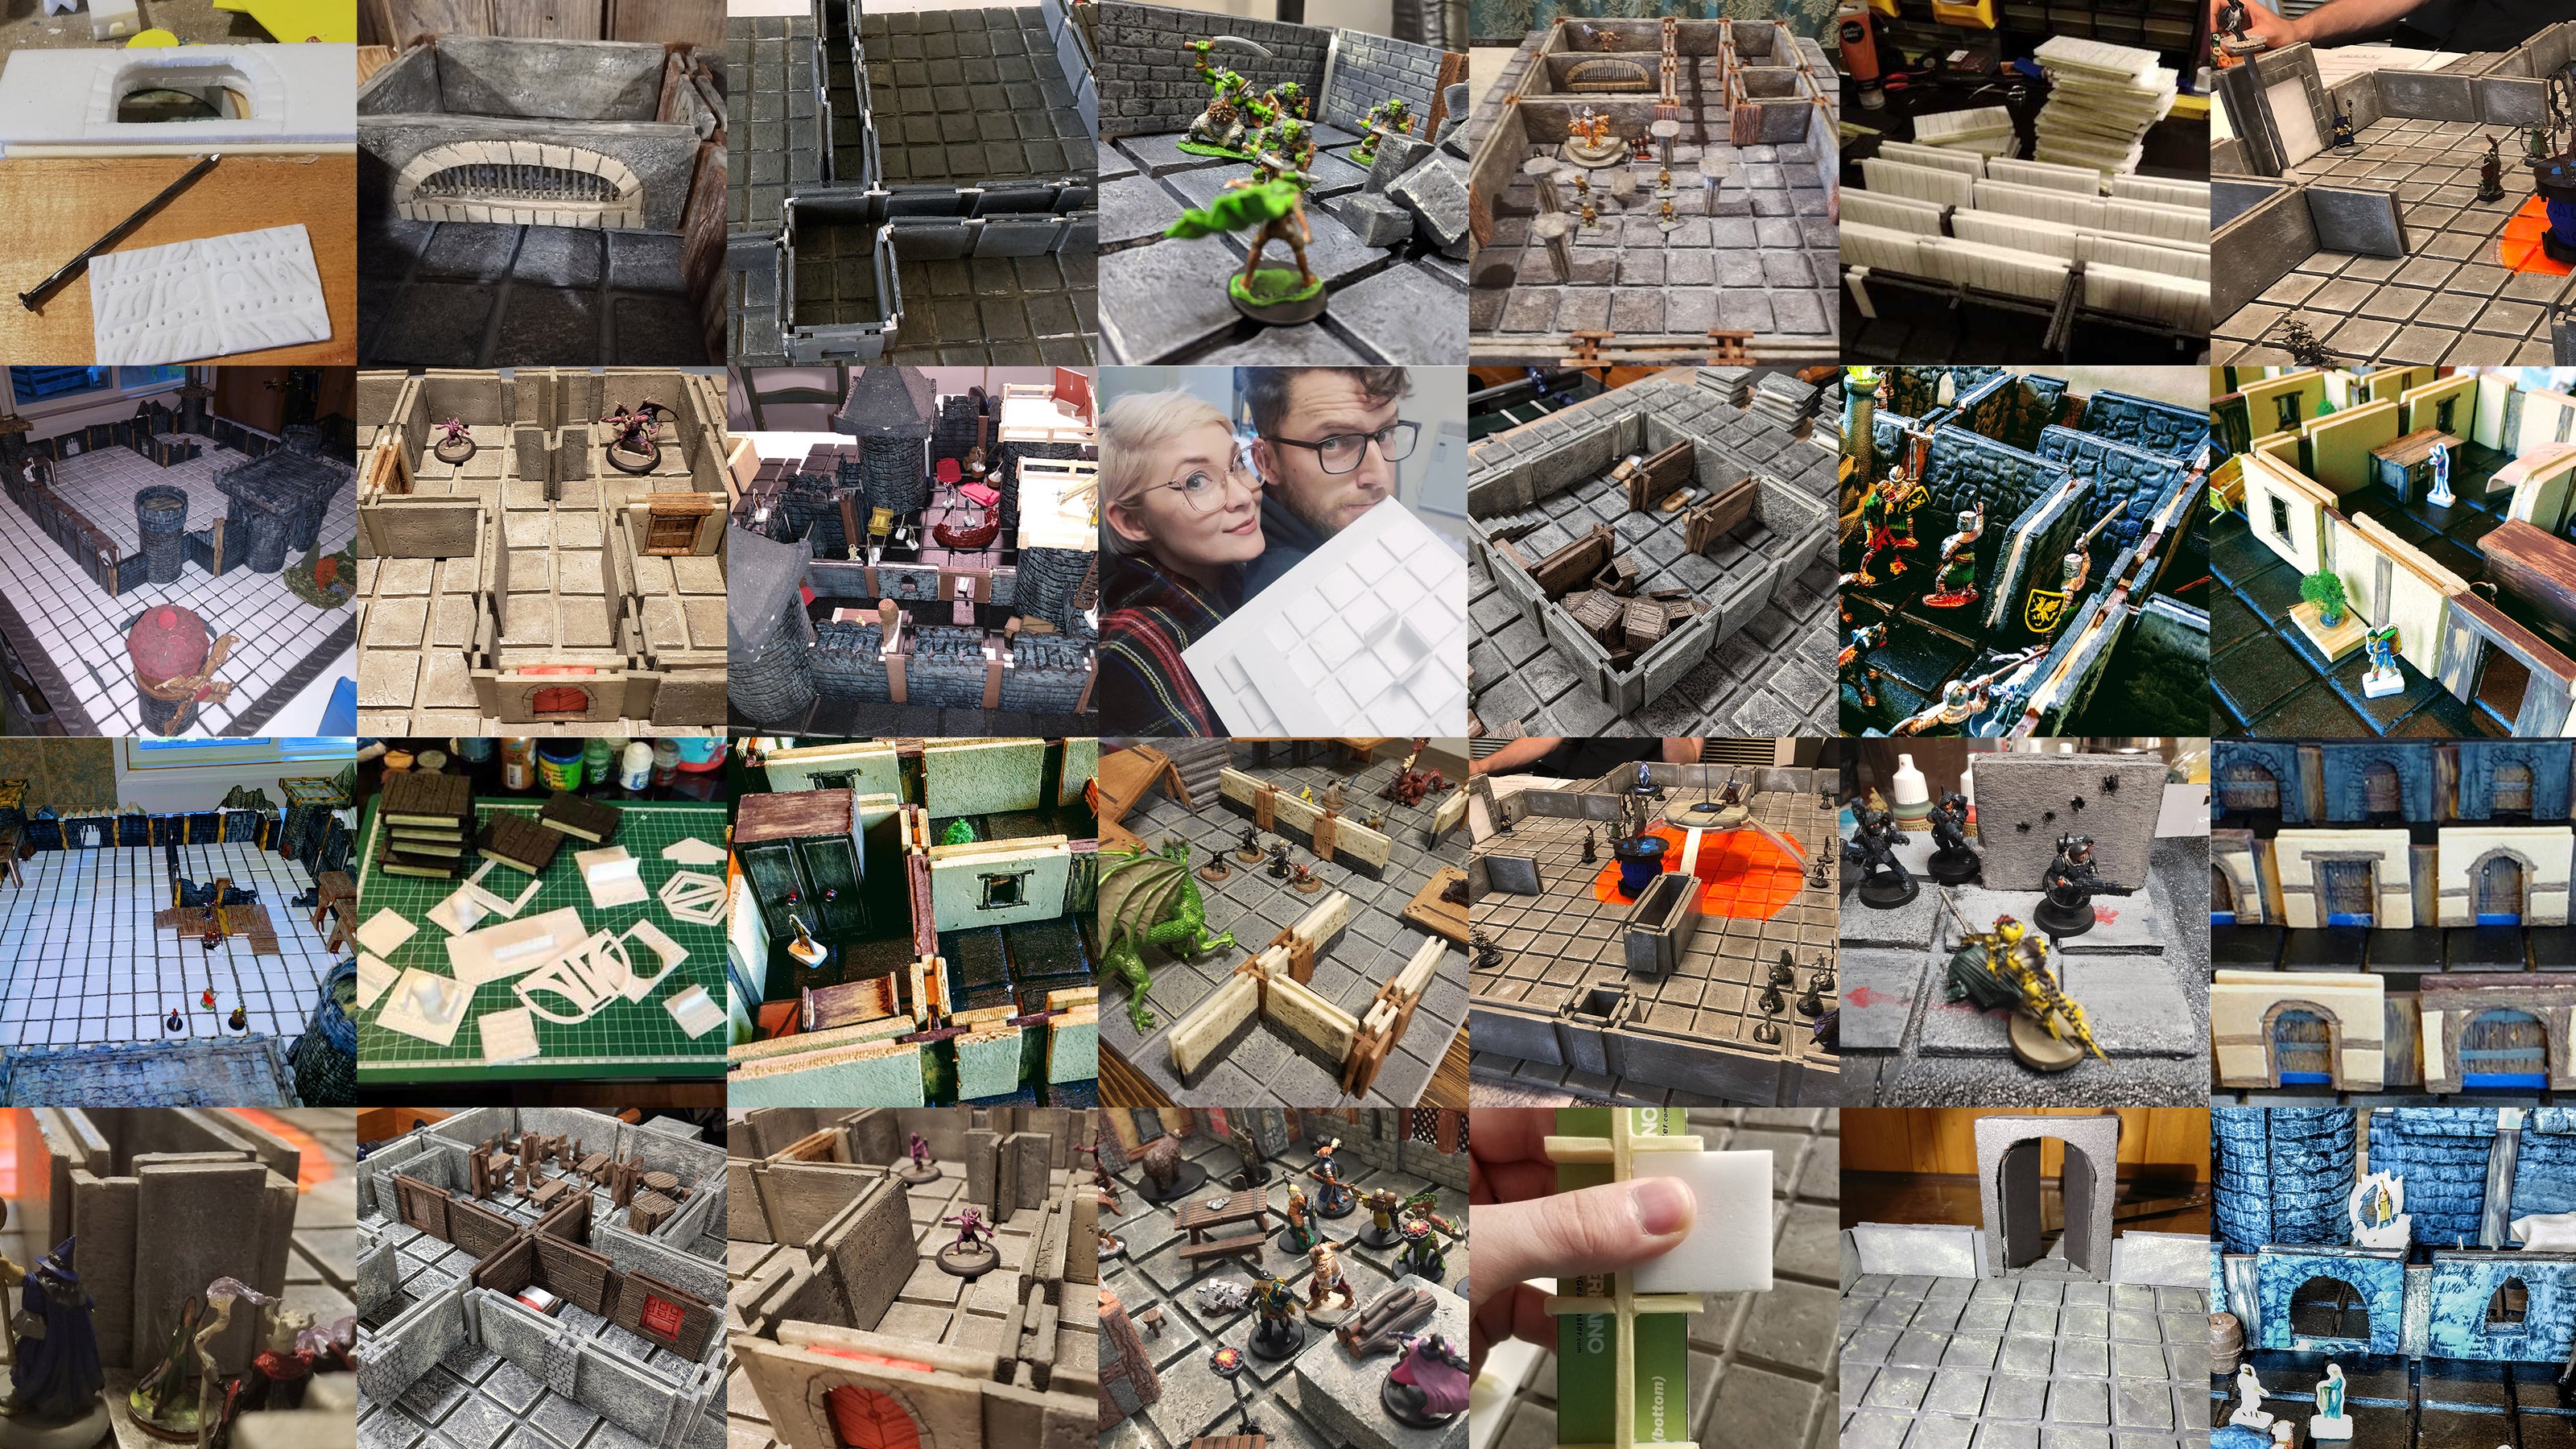 Join thousands of TERRAINO builders from around the world as you build your TERRAINO tabletop terrain set.